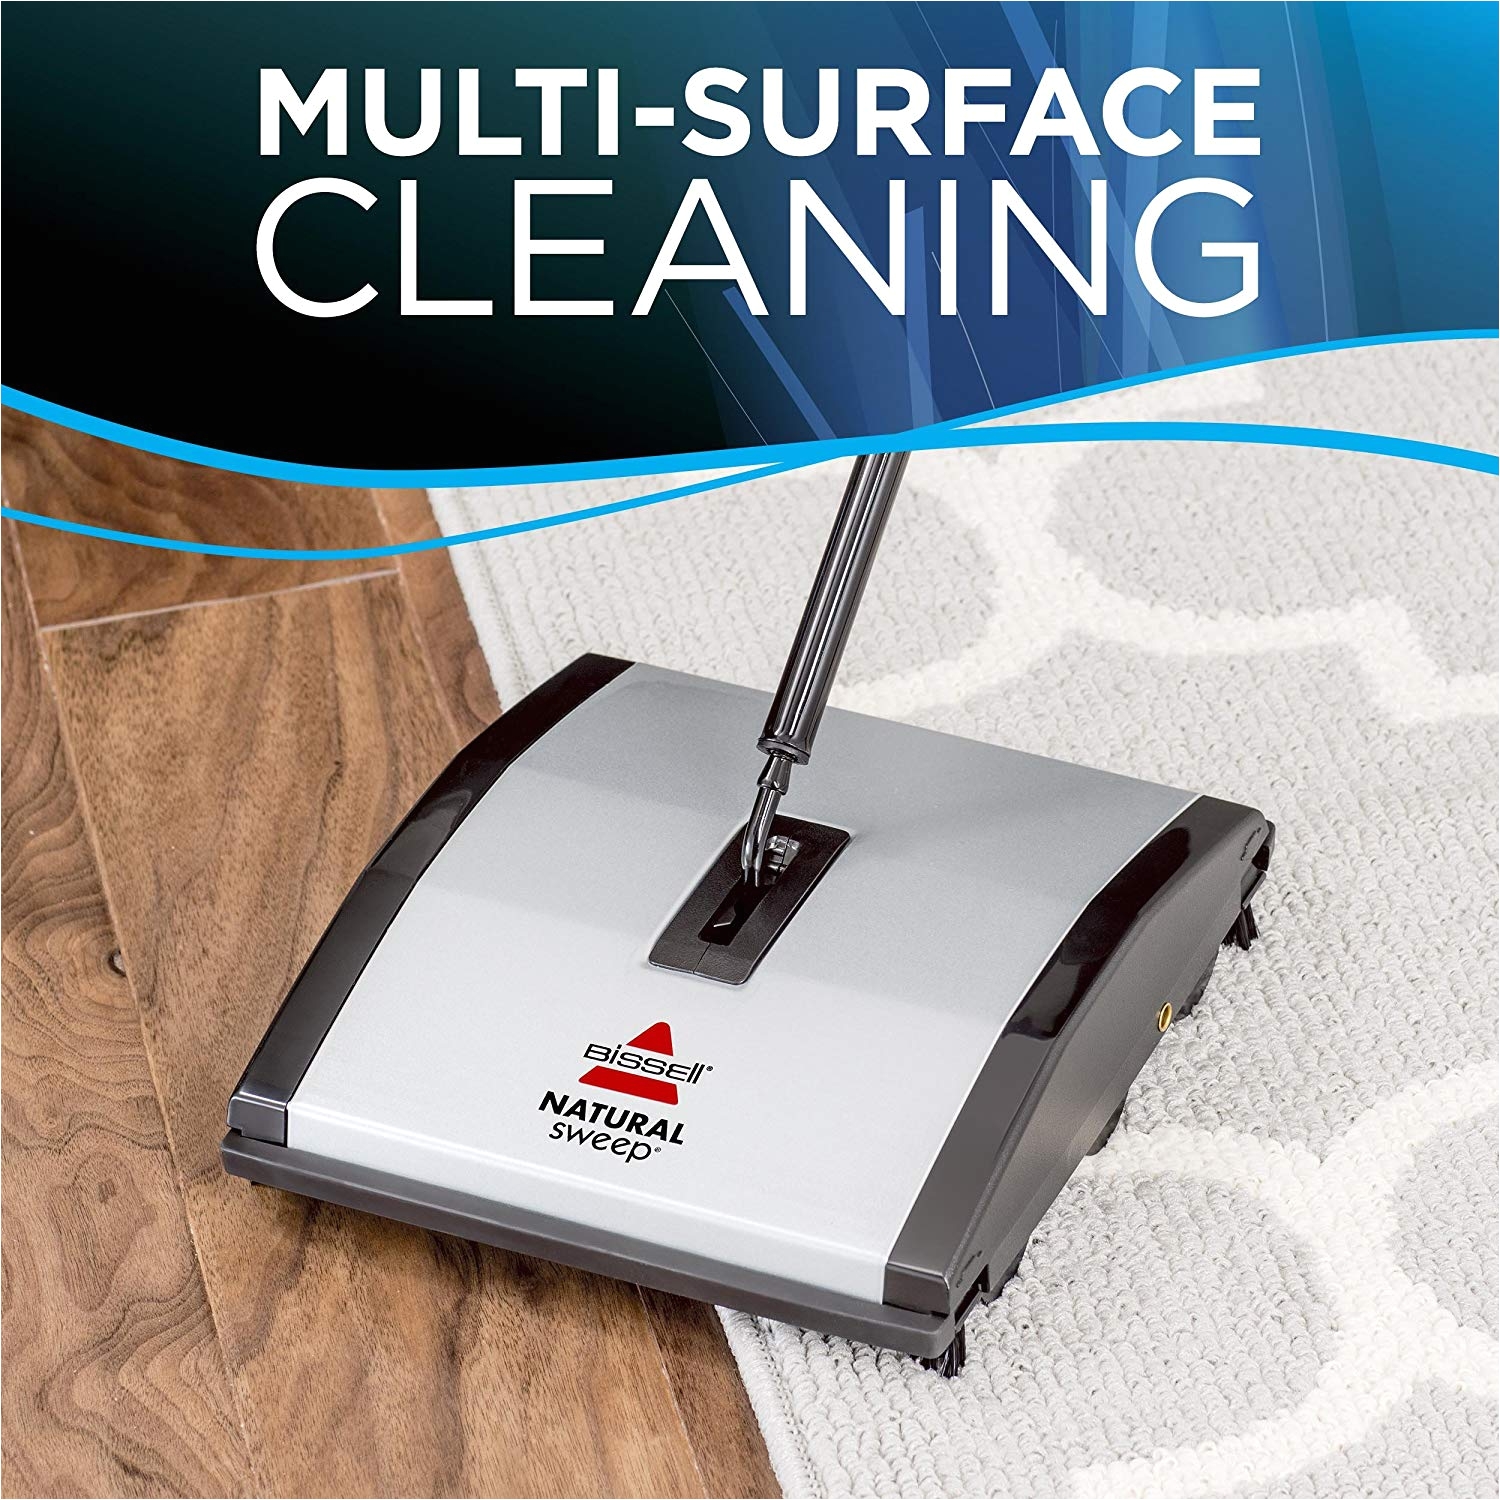 this one is the best sweeper for hardwood floors from the house of bissell the bissell natural sweep dual brush 9230a sweeper not just has an ergonomic